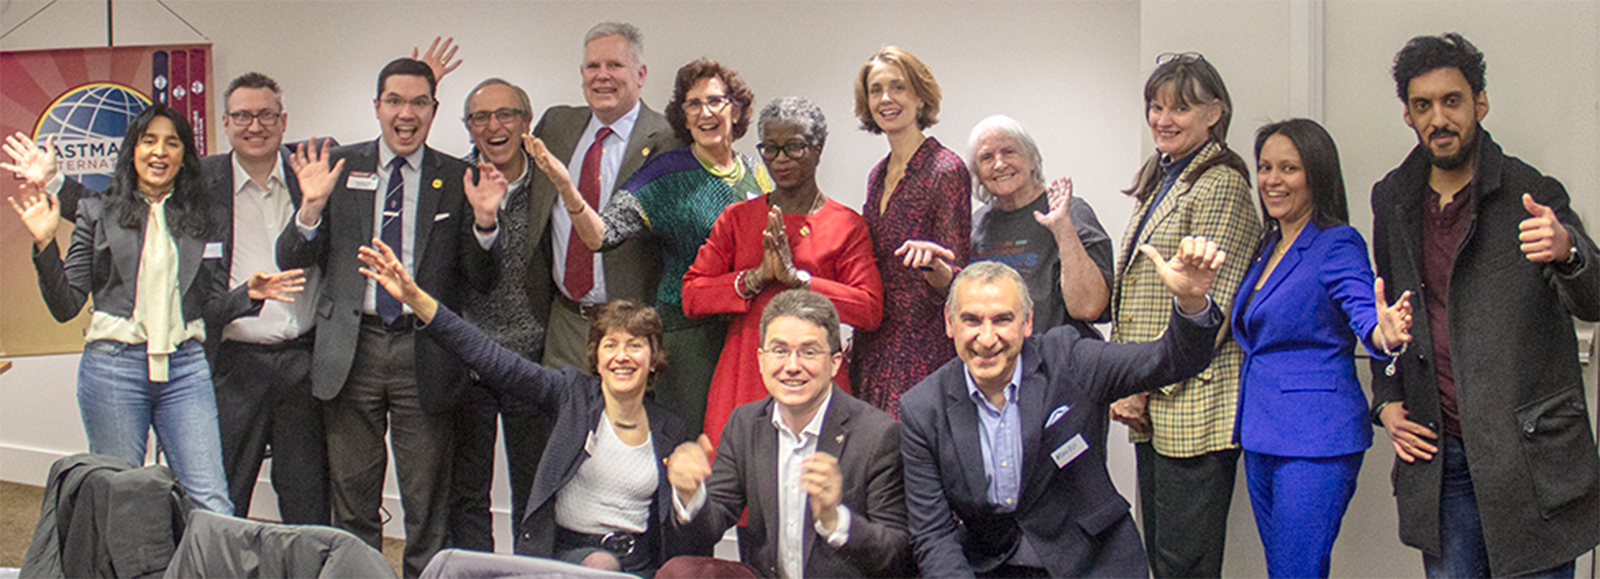 Large group of Toastmasters from London, England celebrating with hands in the air